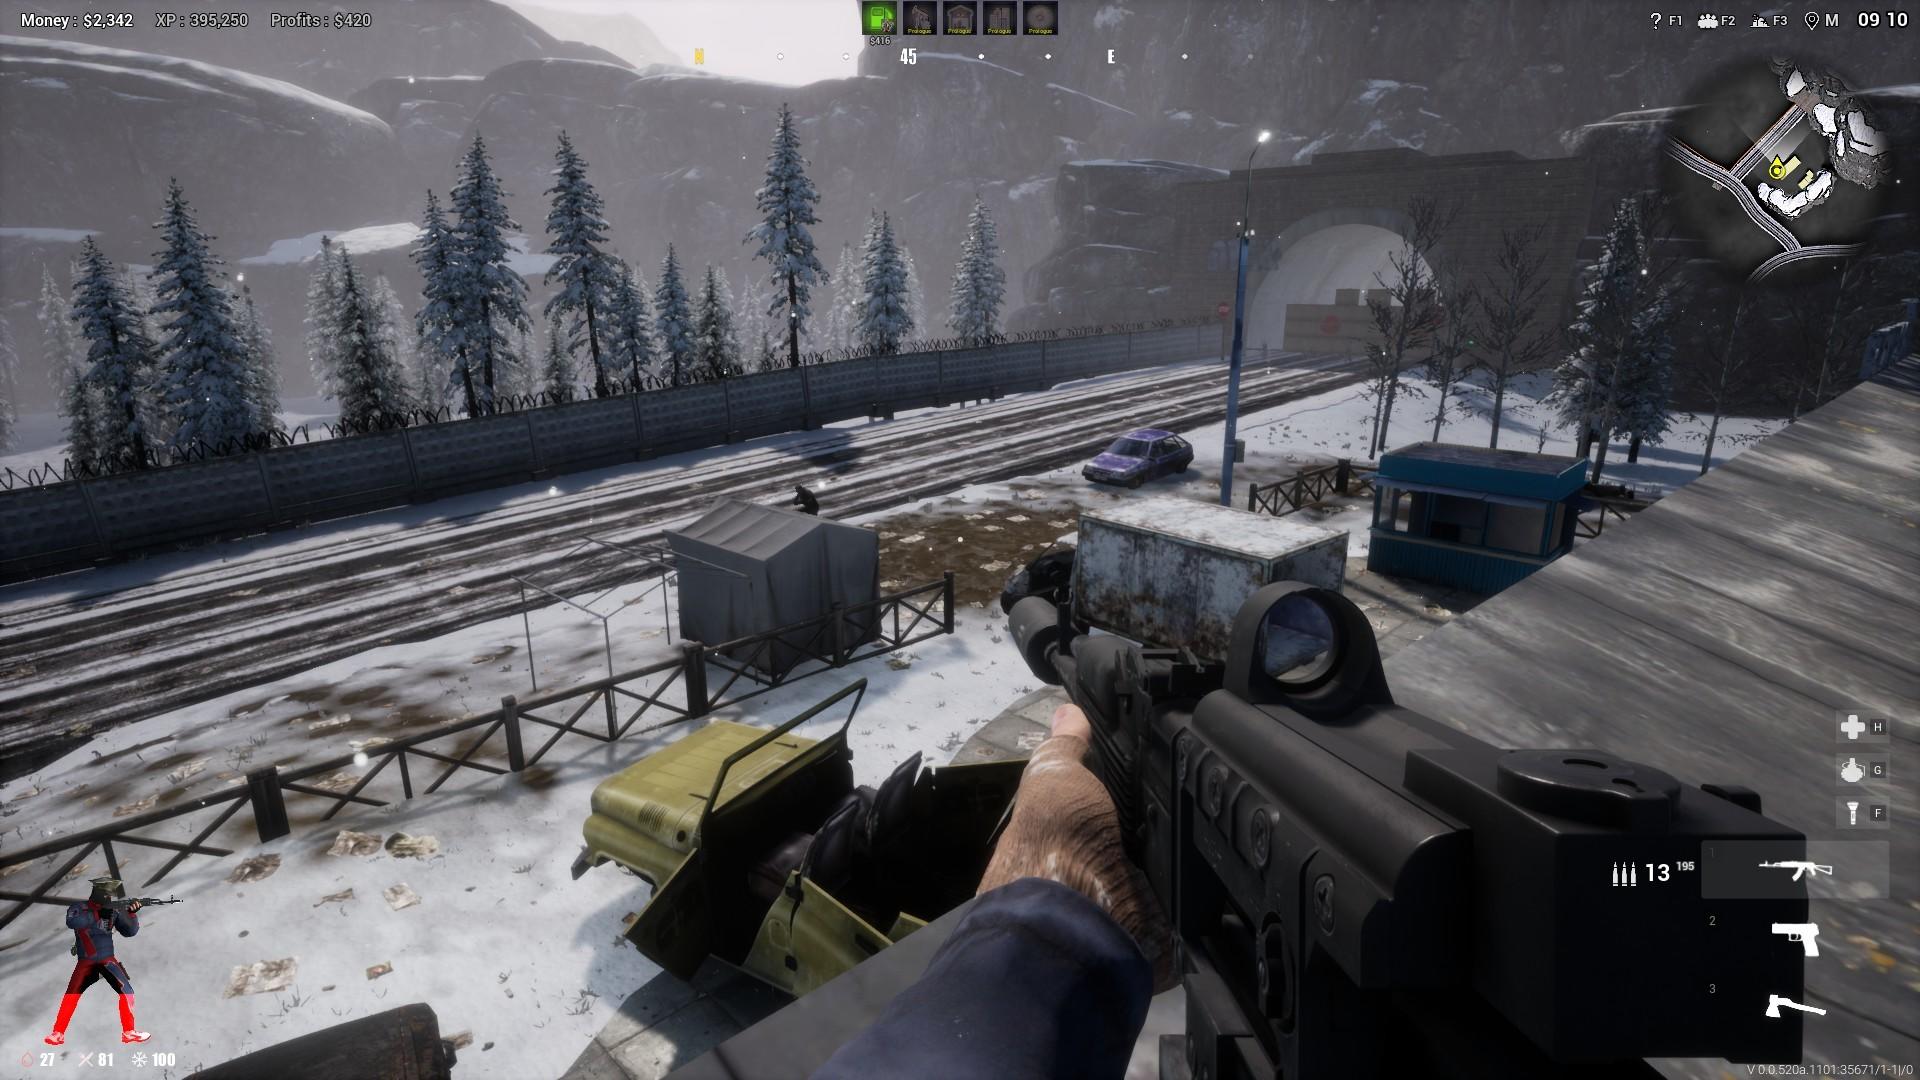 Screenshot of Anarchy: Wolf's law